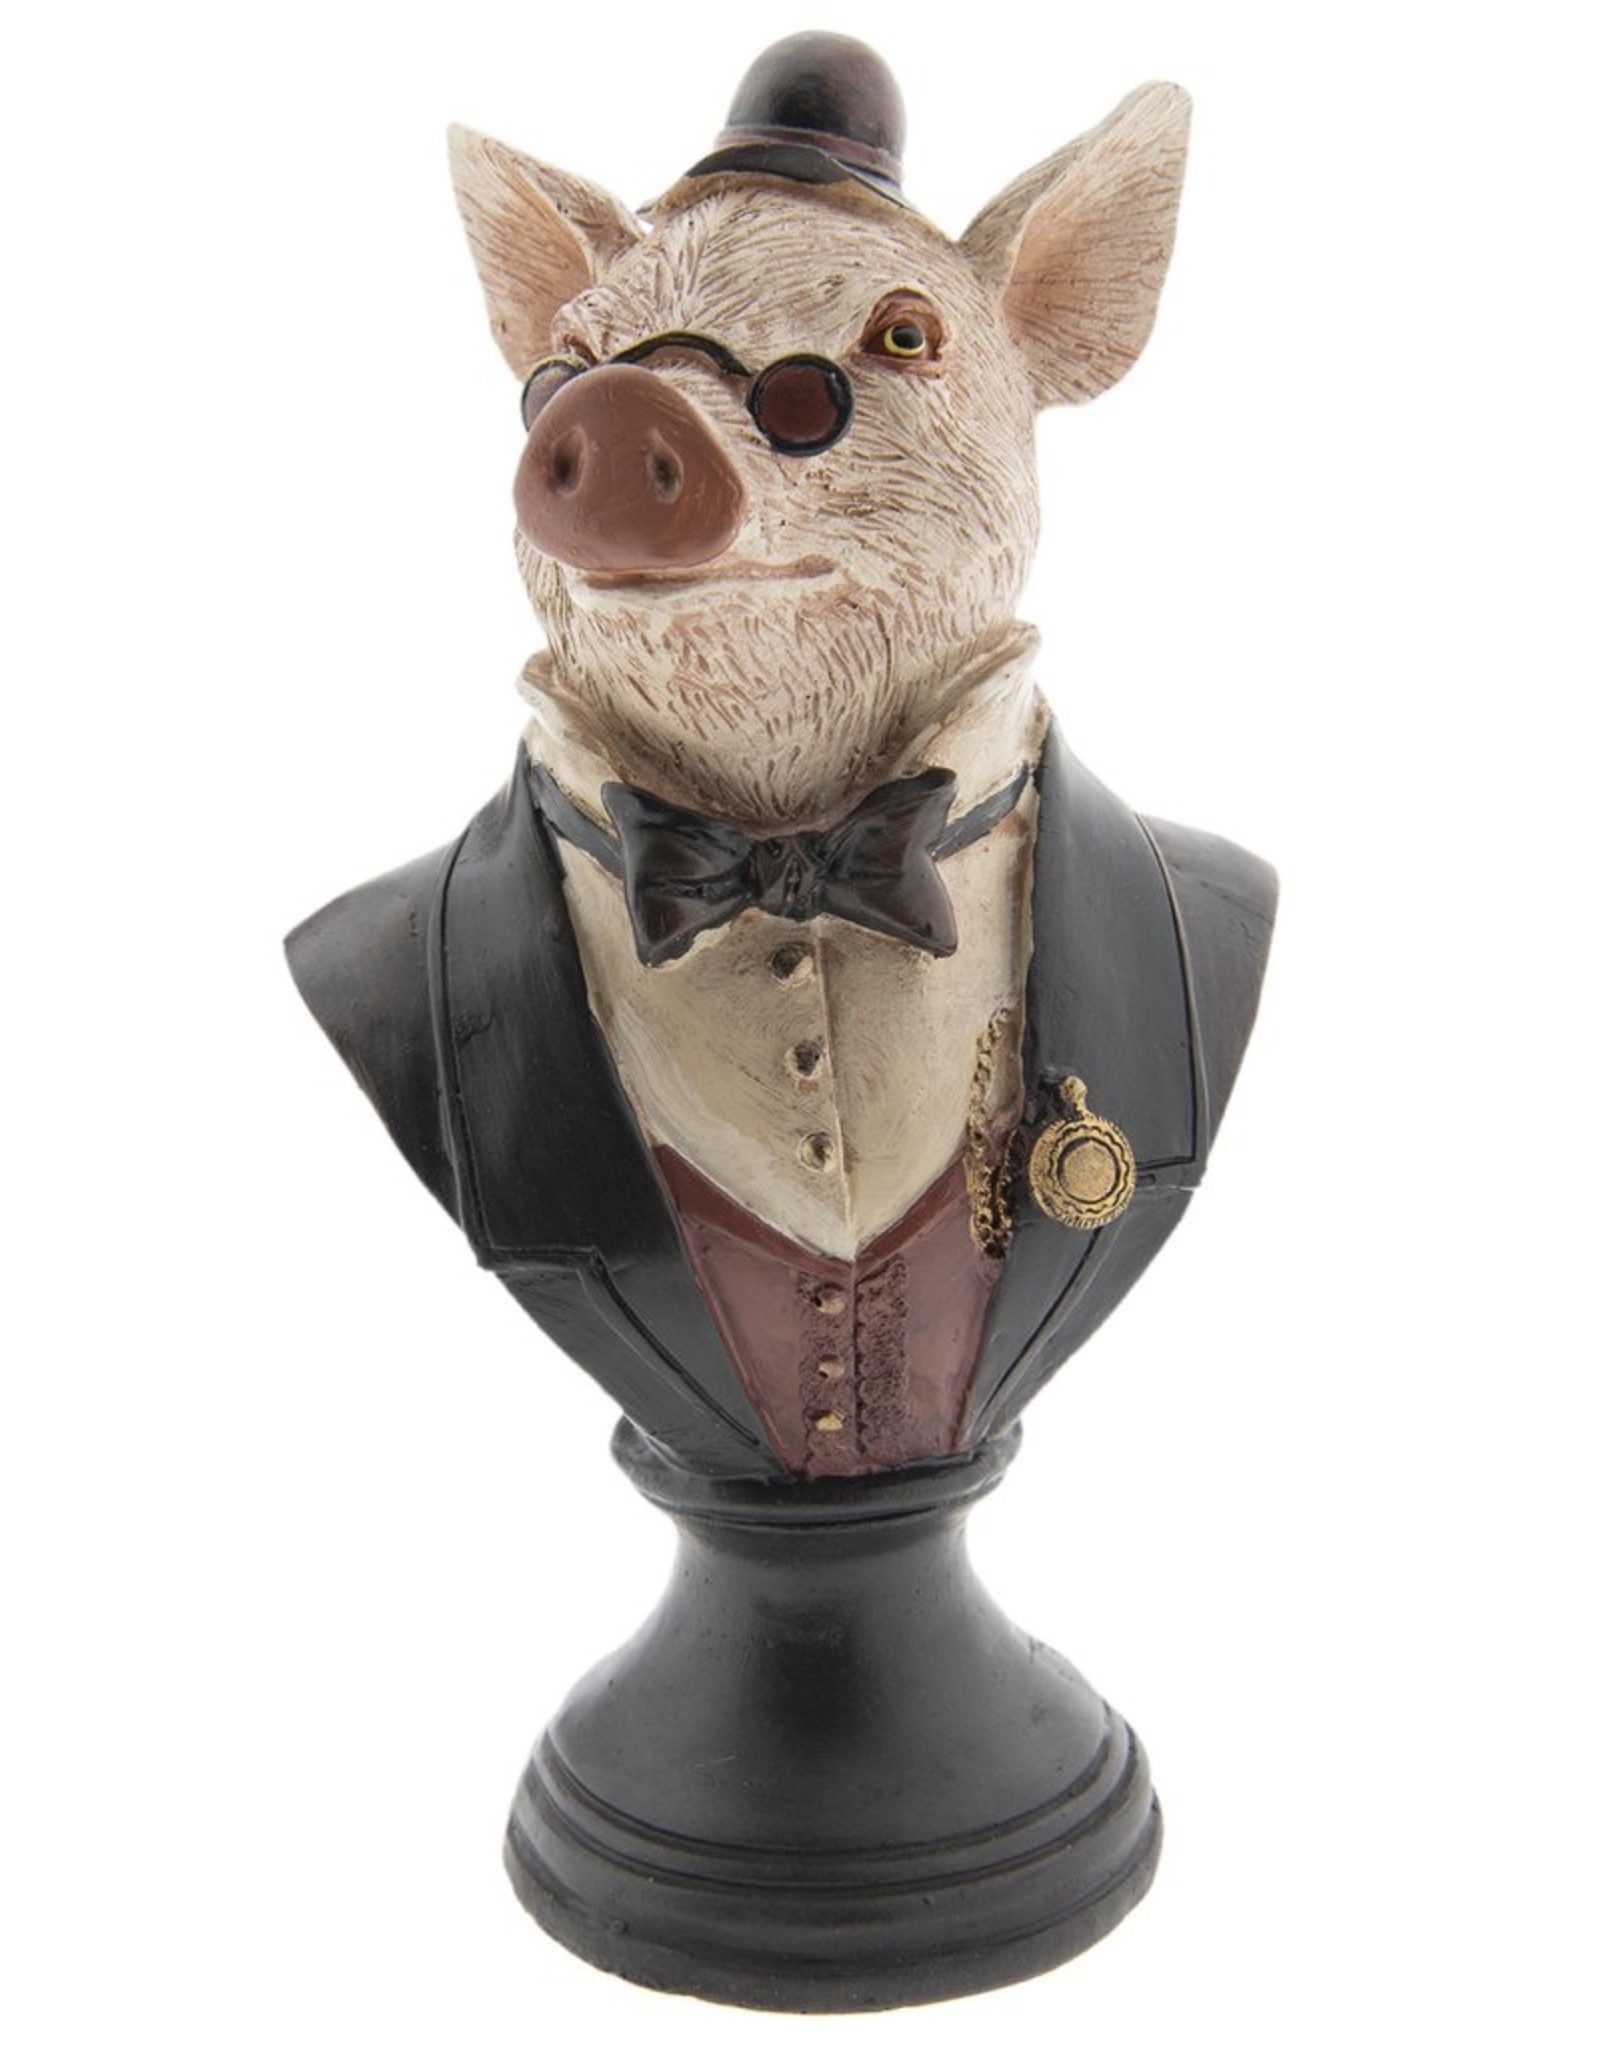 C&E Giftware Figurines Collectables - Pig Clerk statue 24cm (bust)